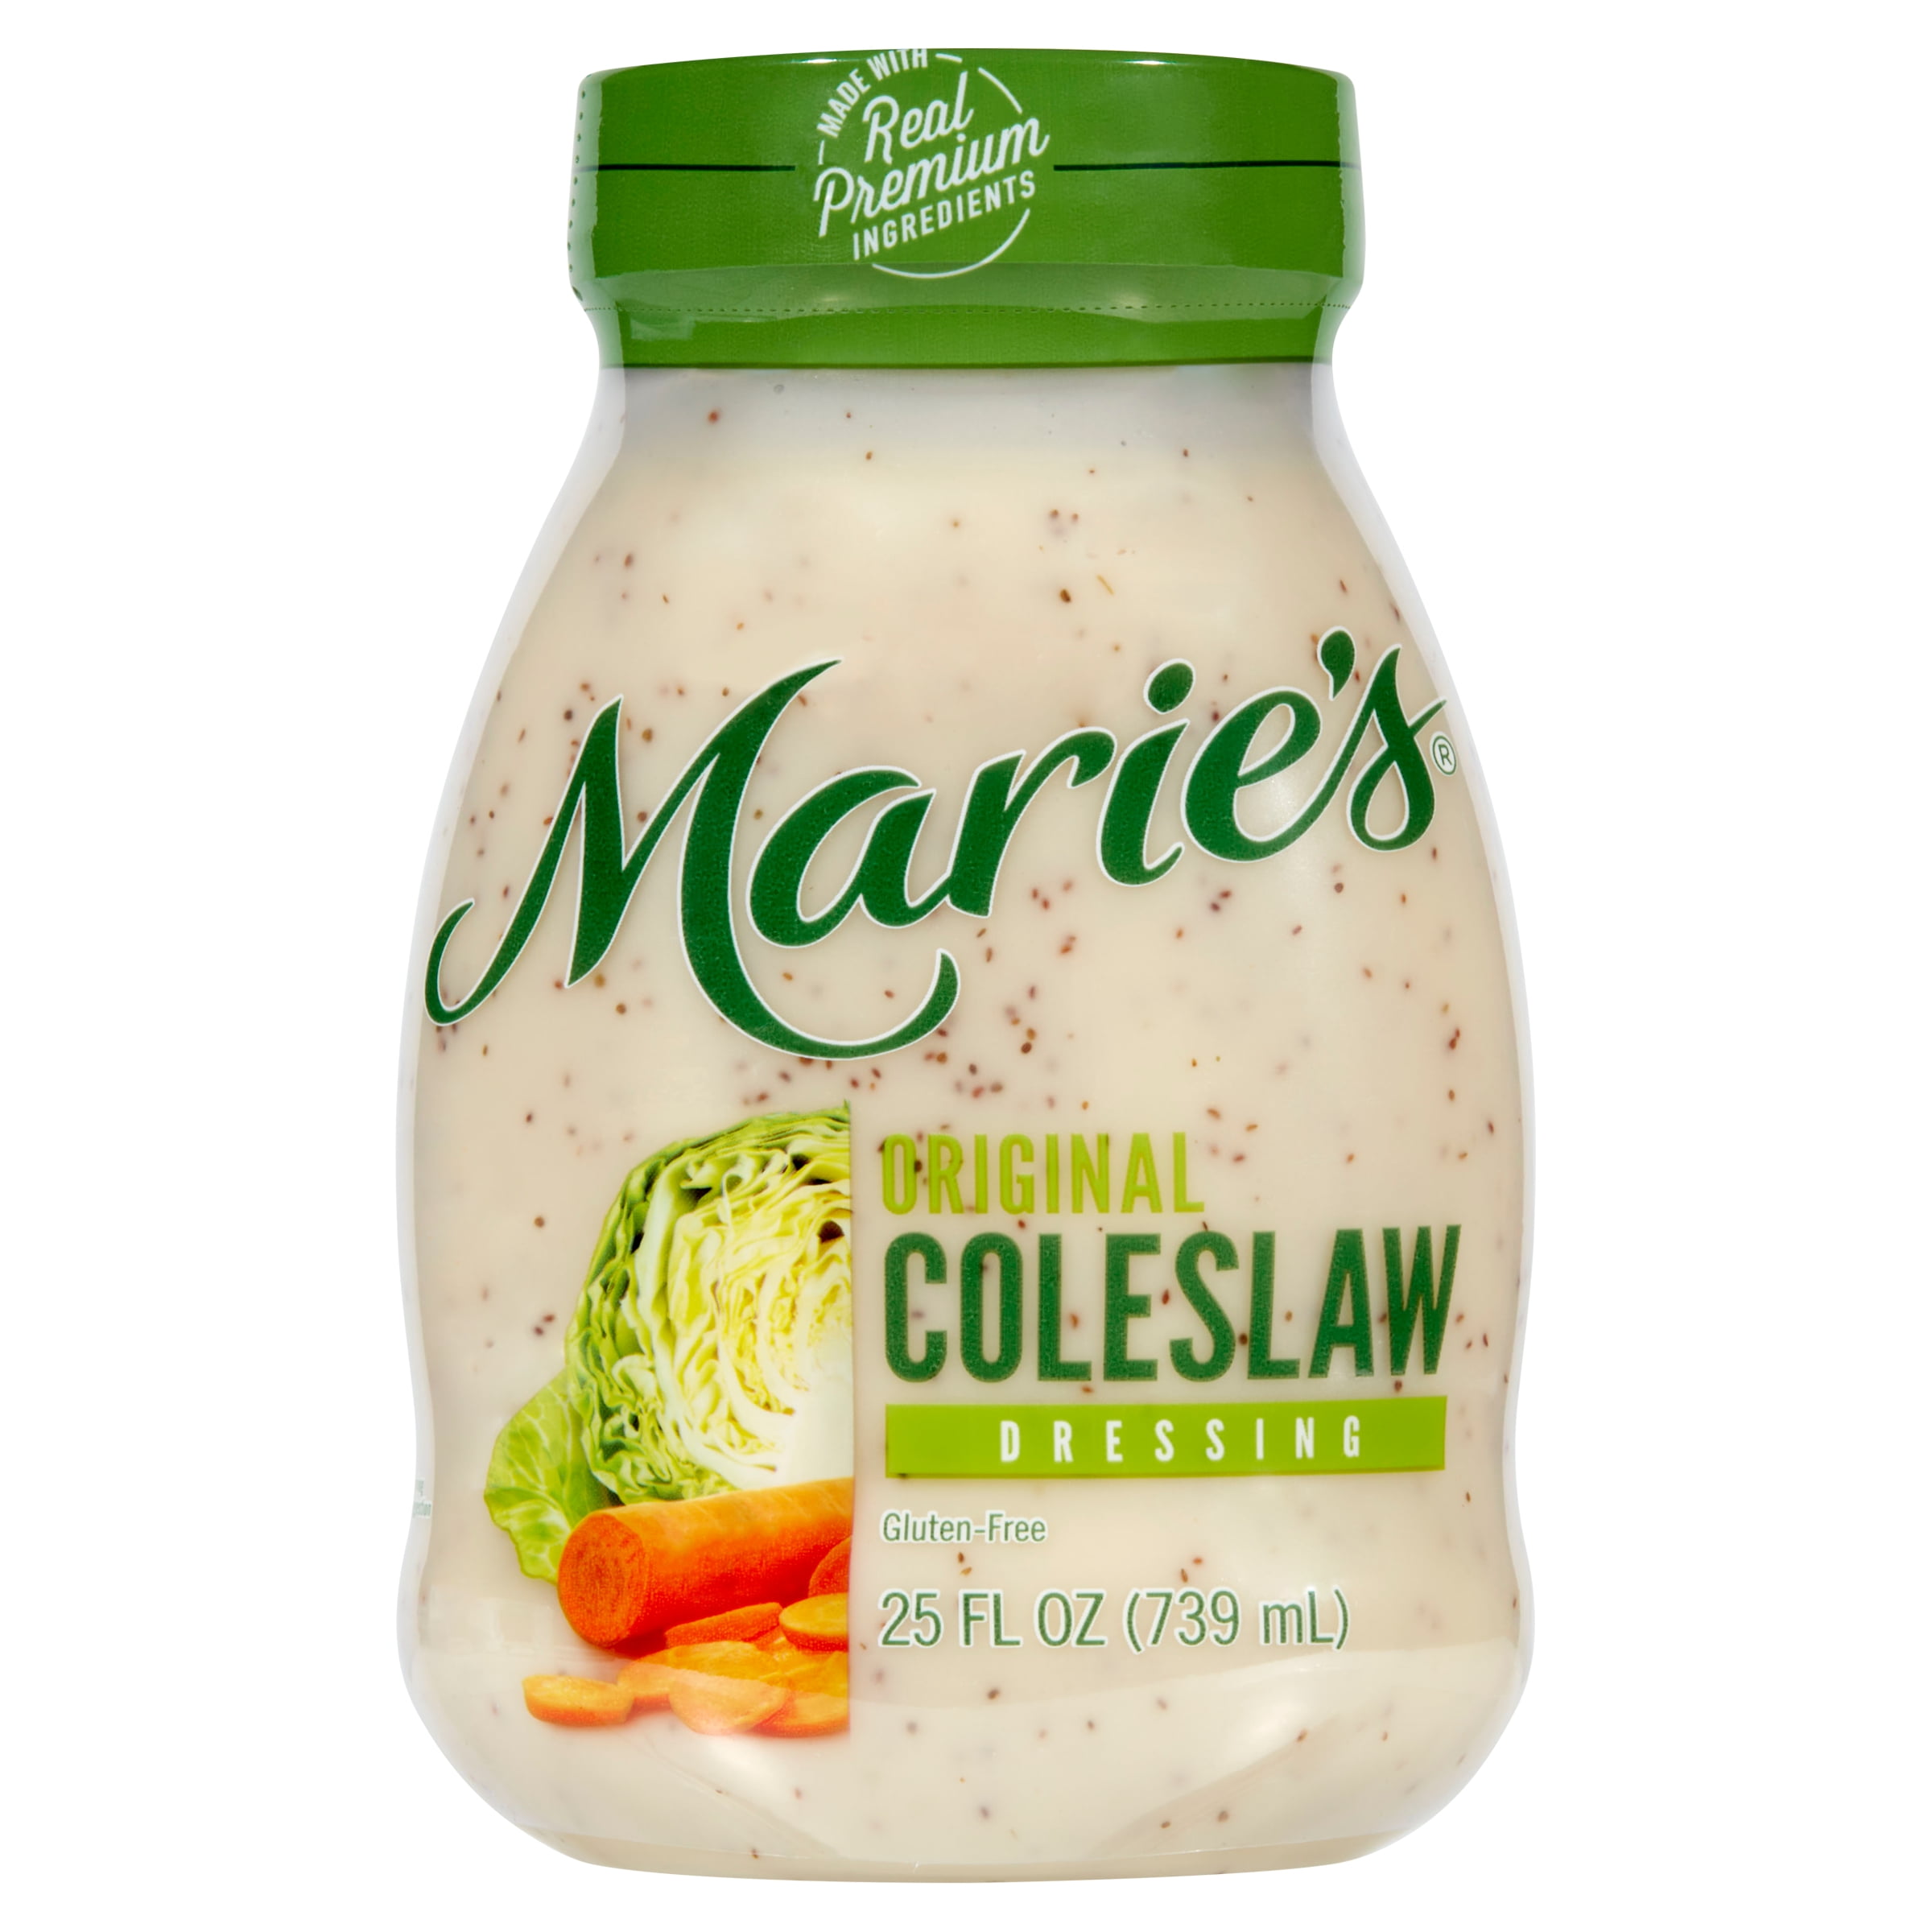 Marie's salad dressing loses its famous glass jar for plastic